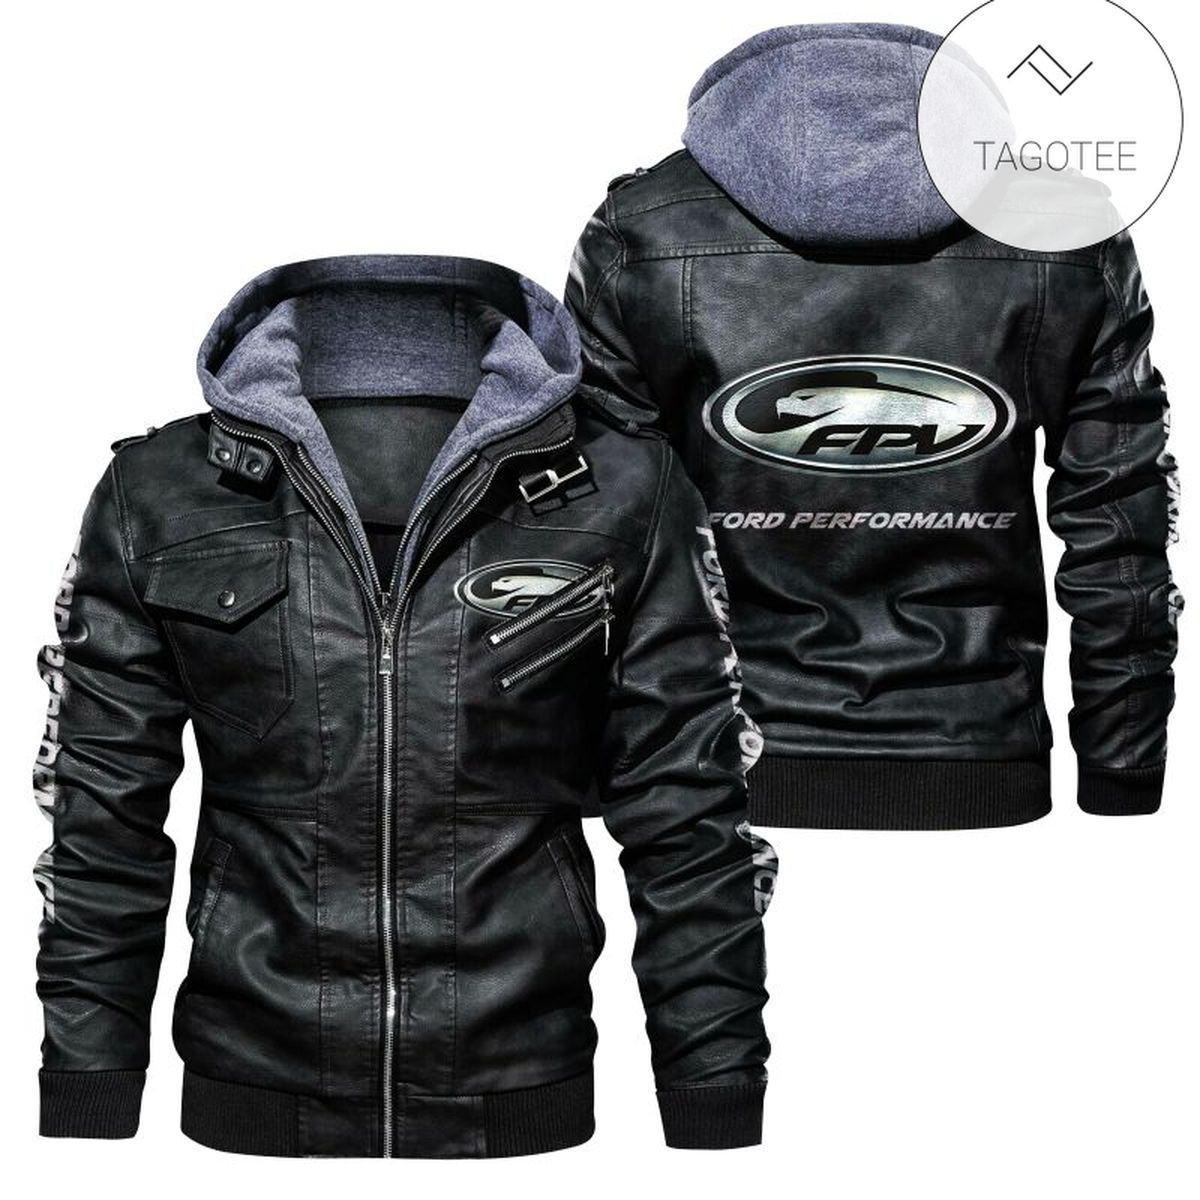 Ford Performance Vehicles 2D Leather Jacket